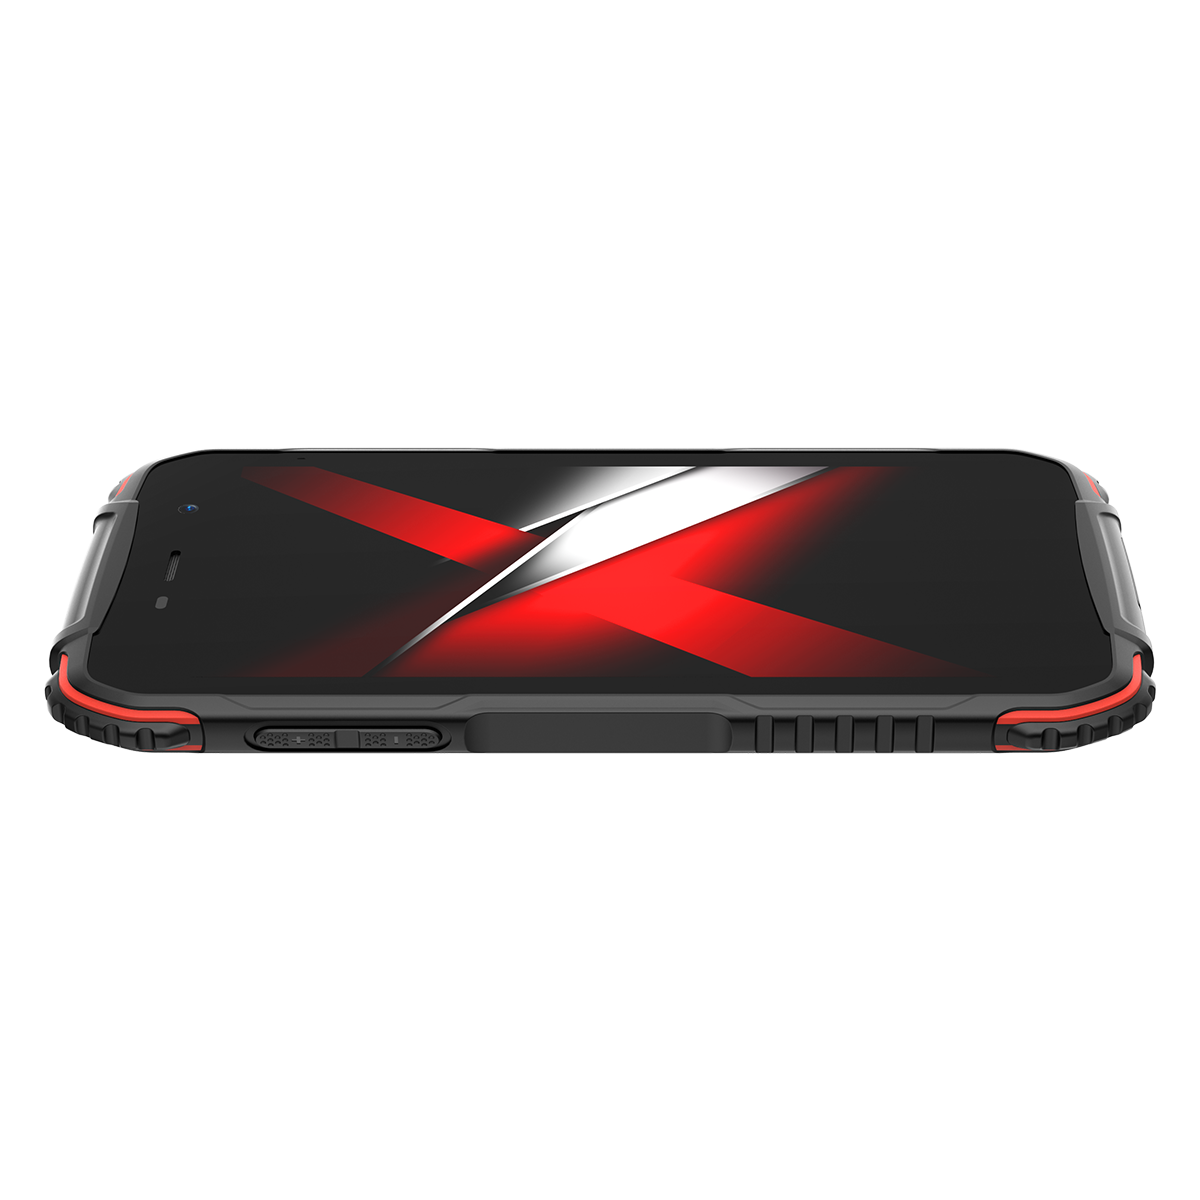 Doogee S35T 3GB/64GB Flame Red